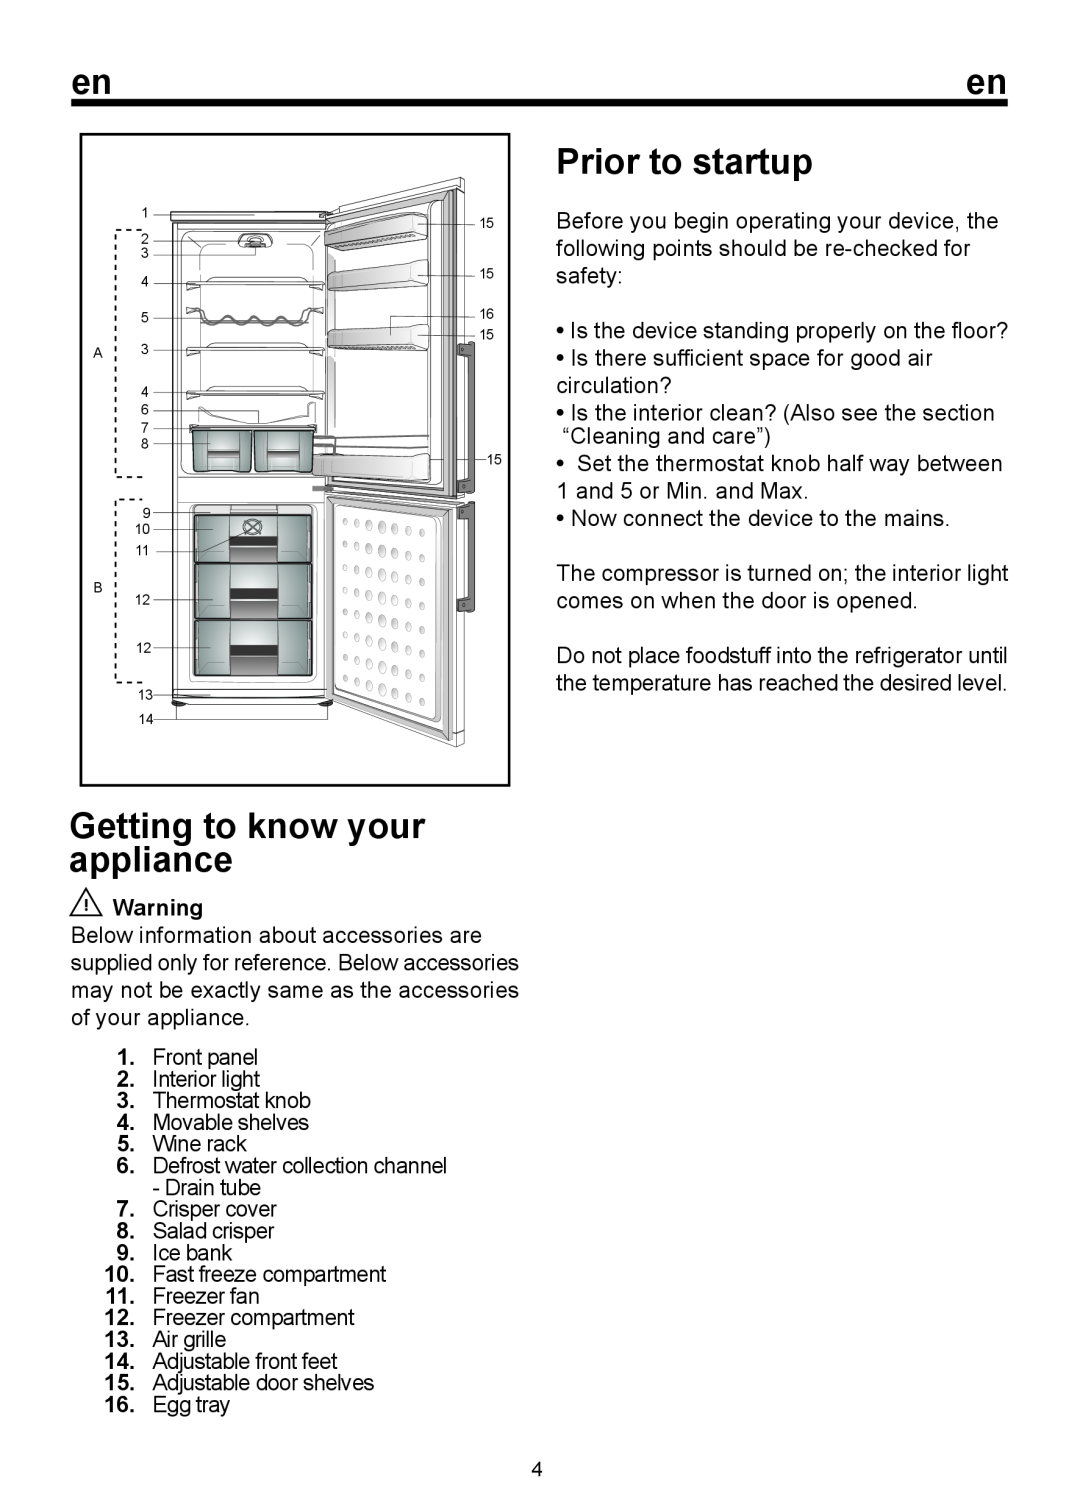 Blomberg BRFB 1450 SS, BRFB 1452 SS manual Prior to startup, Getting to know your appliance 